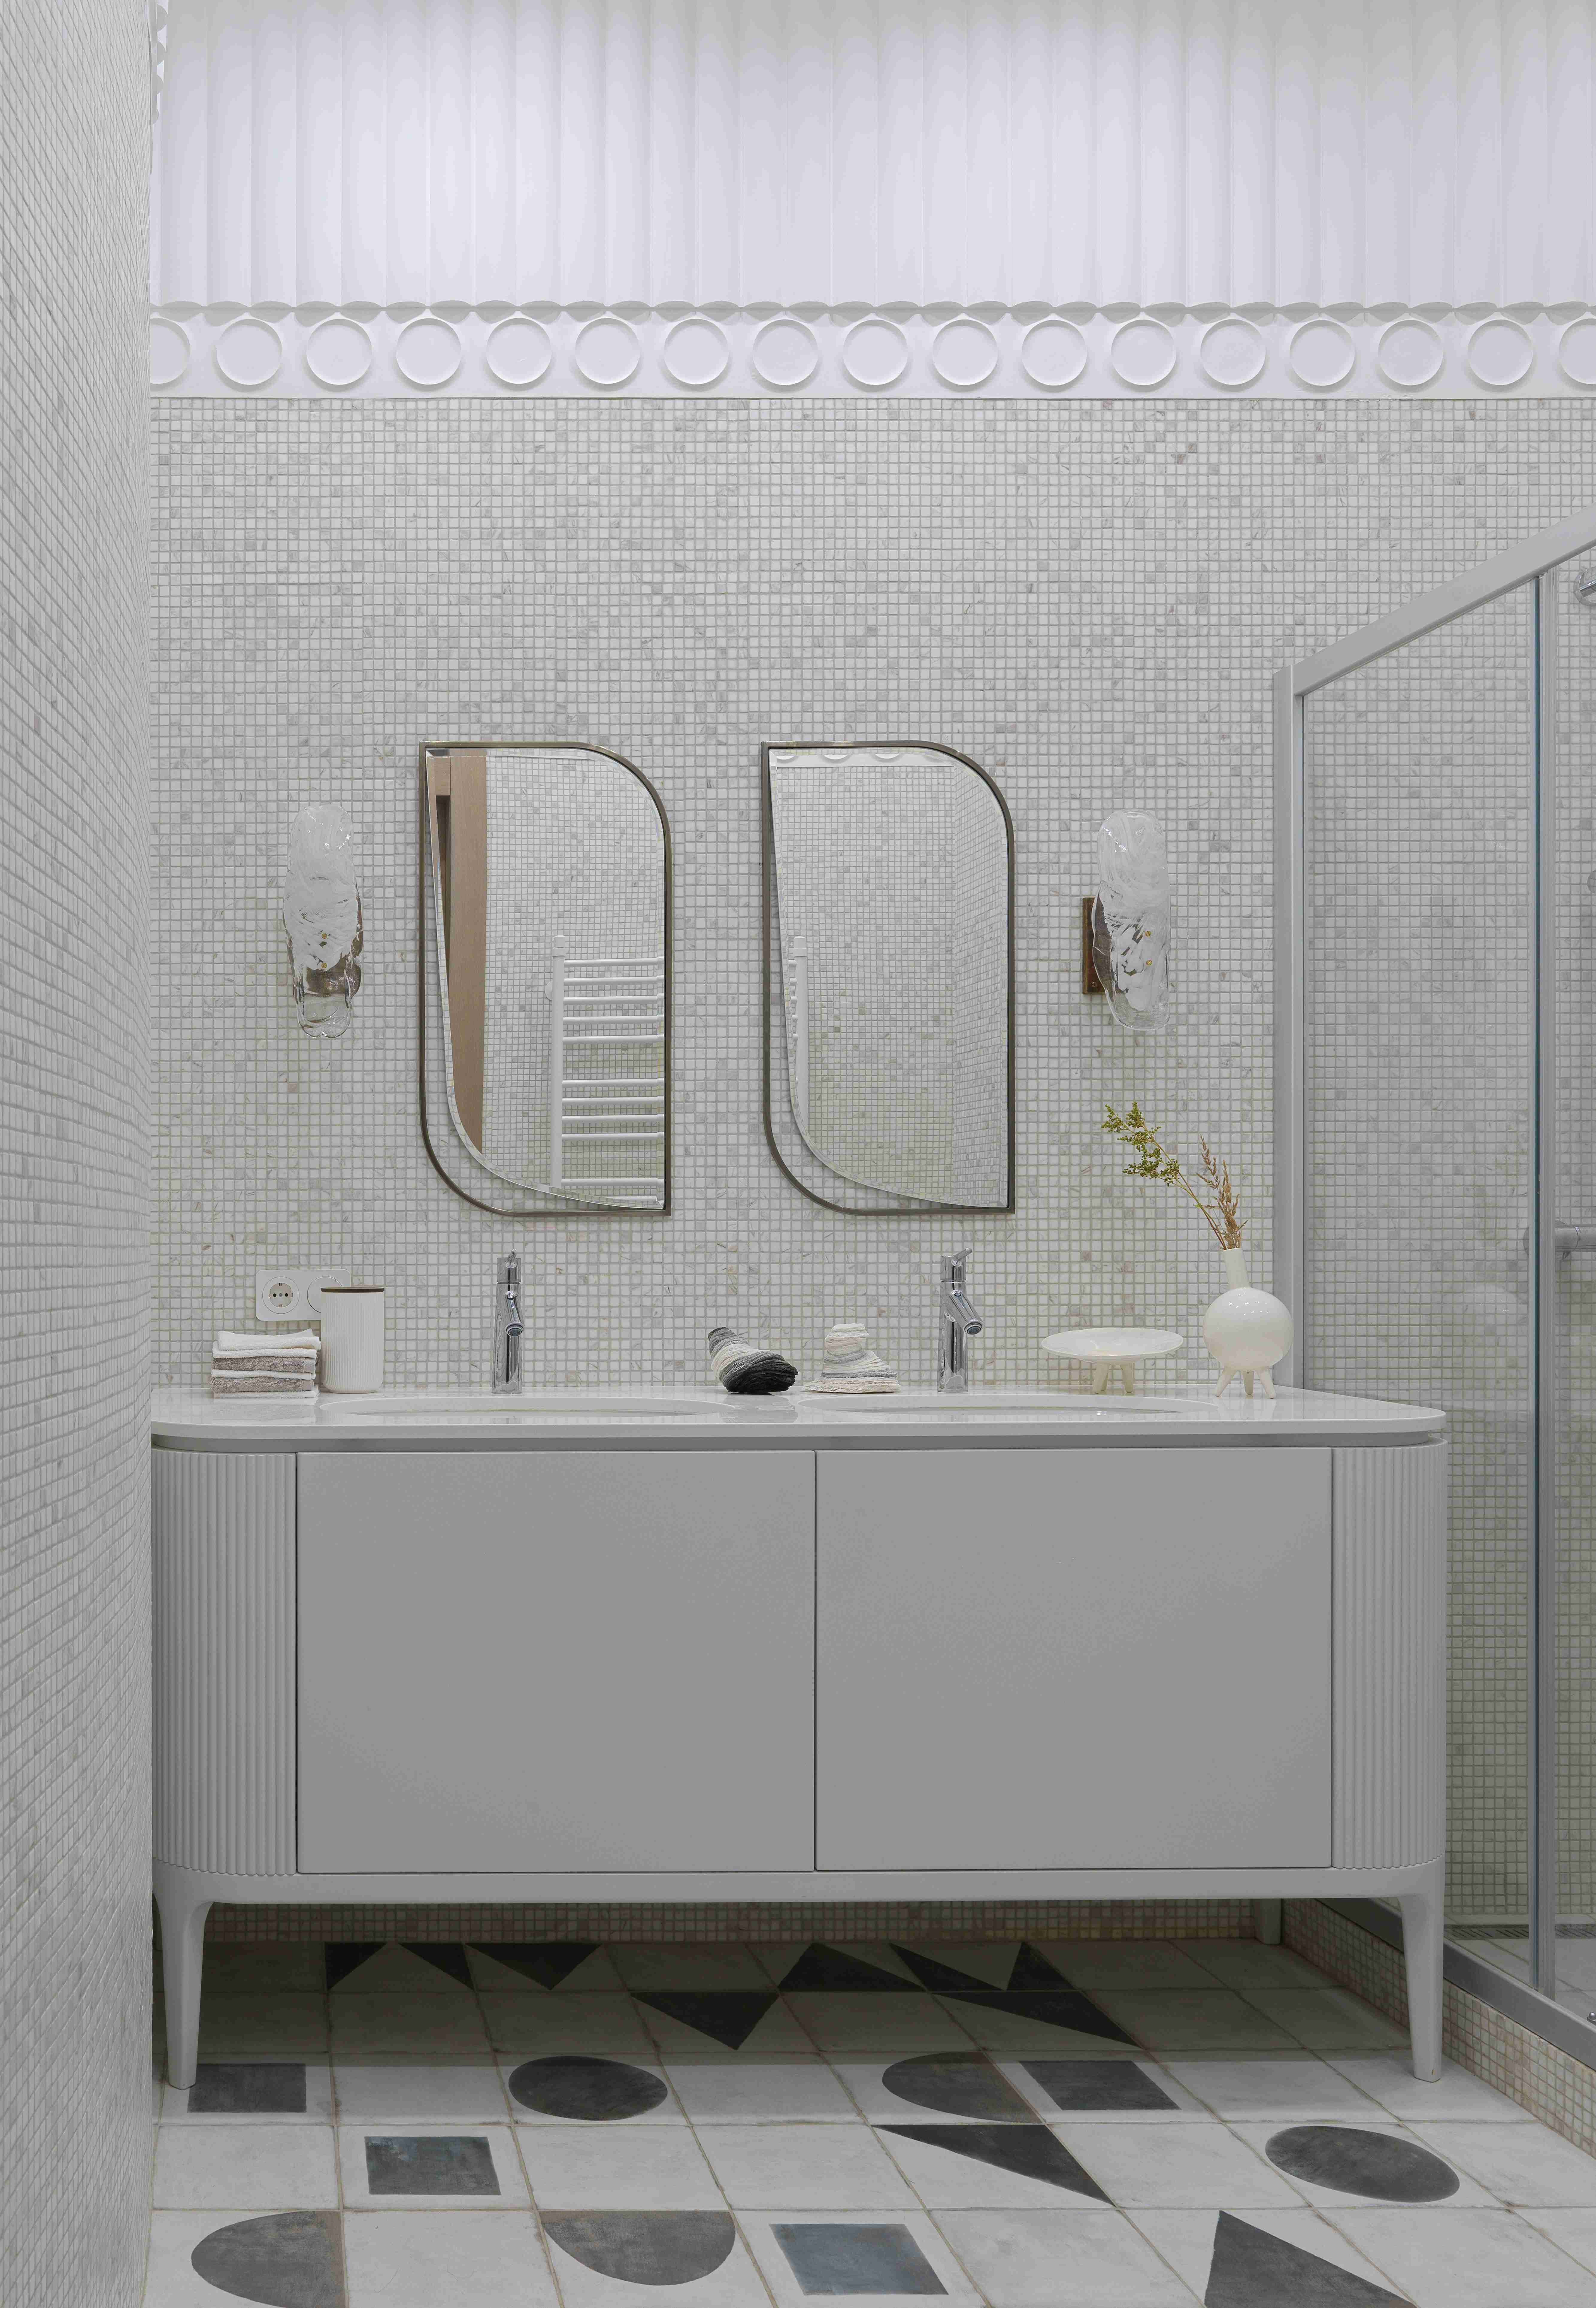 A modern white bathroom with double vanity.